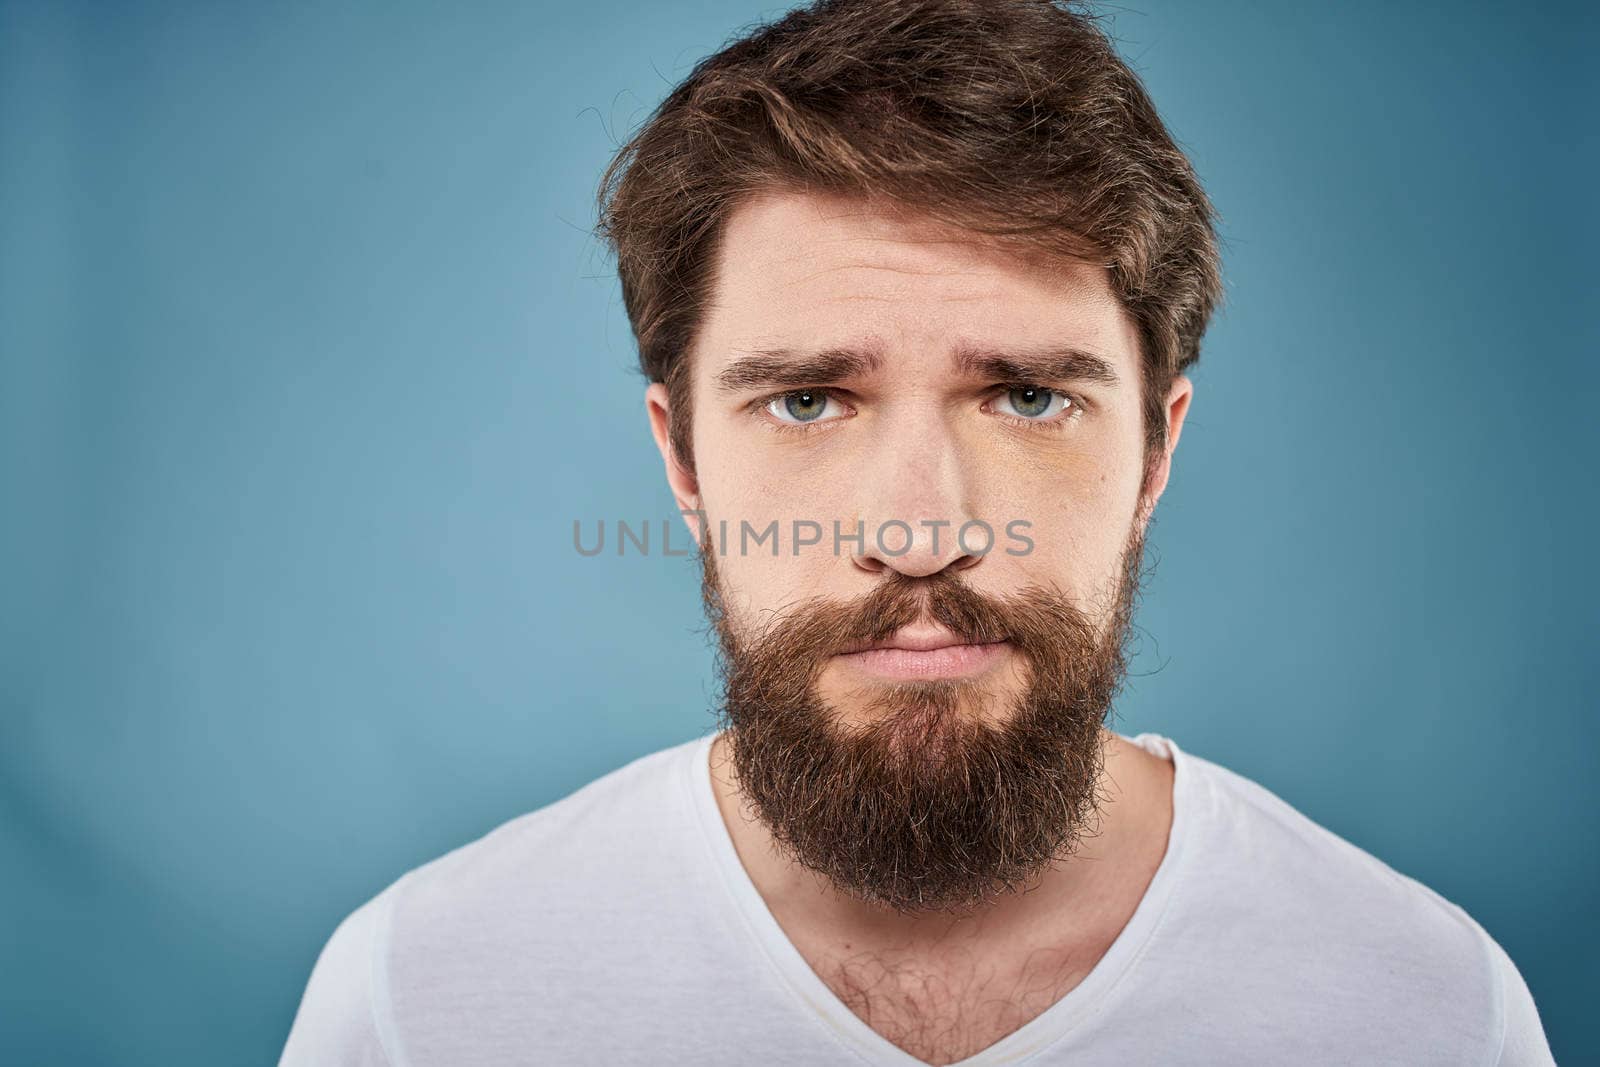 Bearded man displeased facial expression emotions close-up blue background white t-shirt by SHOTPRIME